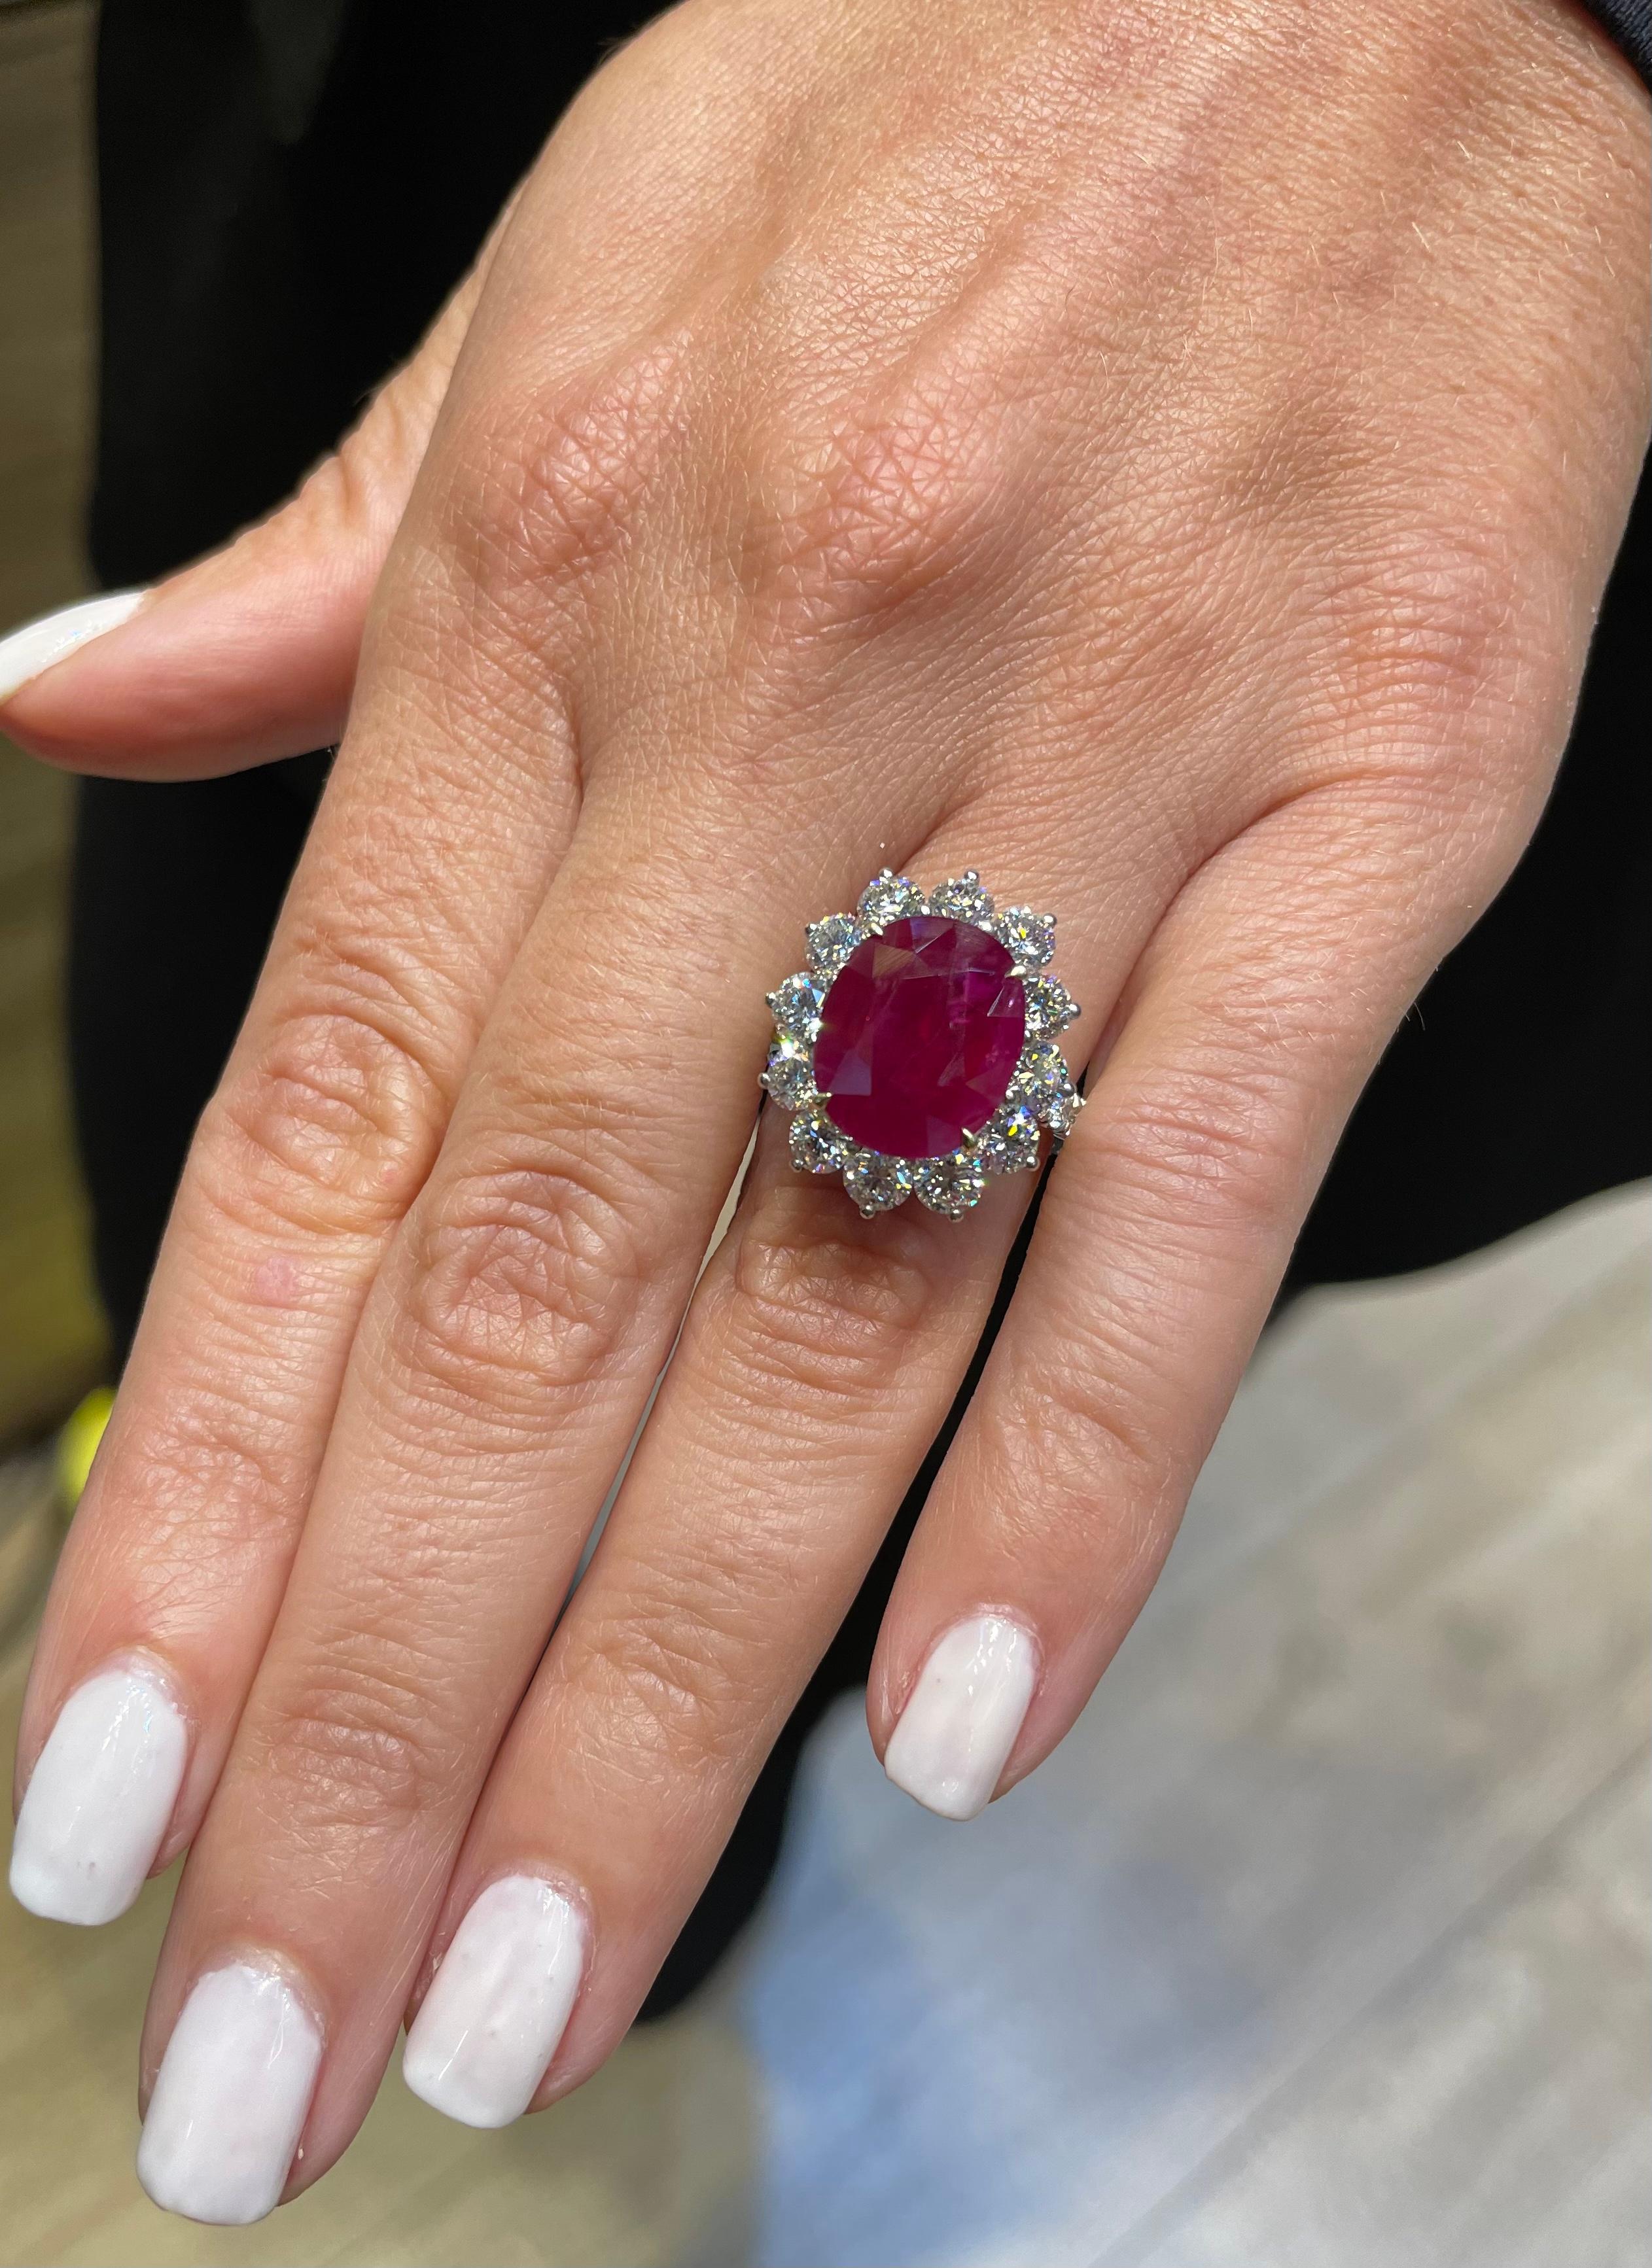 6 Carat Burma Ruby and Diamond Ring For Sale 1